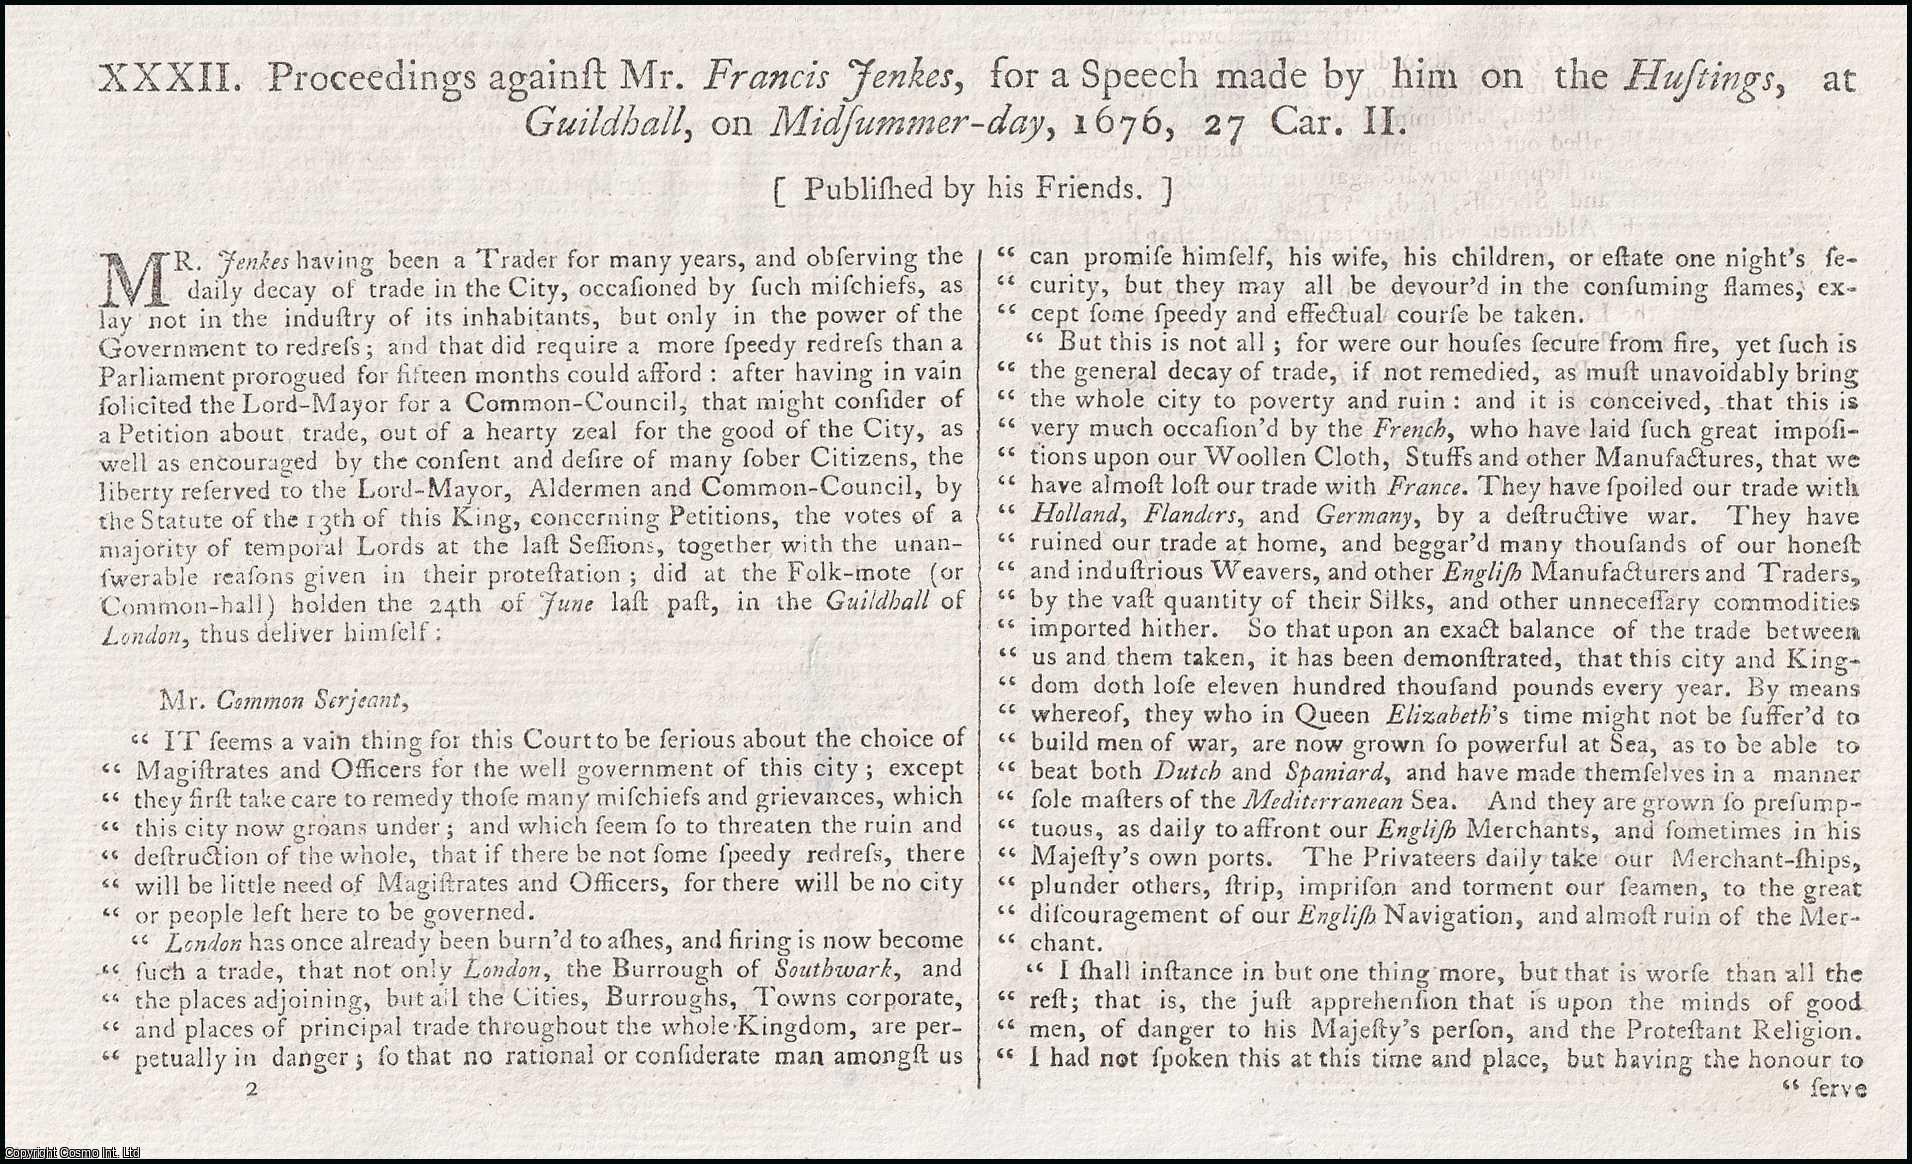 [Trial]. - Proceedings against Mr. Francis Jenkes, for a Speech made by him on the Hustings, at Guildhall, on Midsummer-day, 1676. An original report from the Collected State Trials.